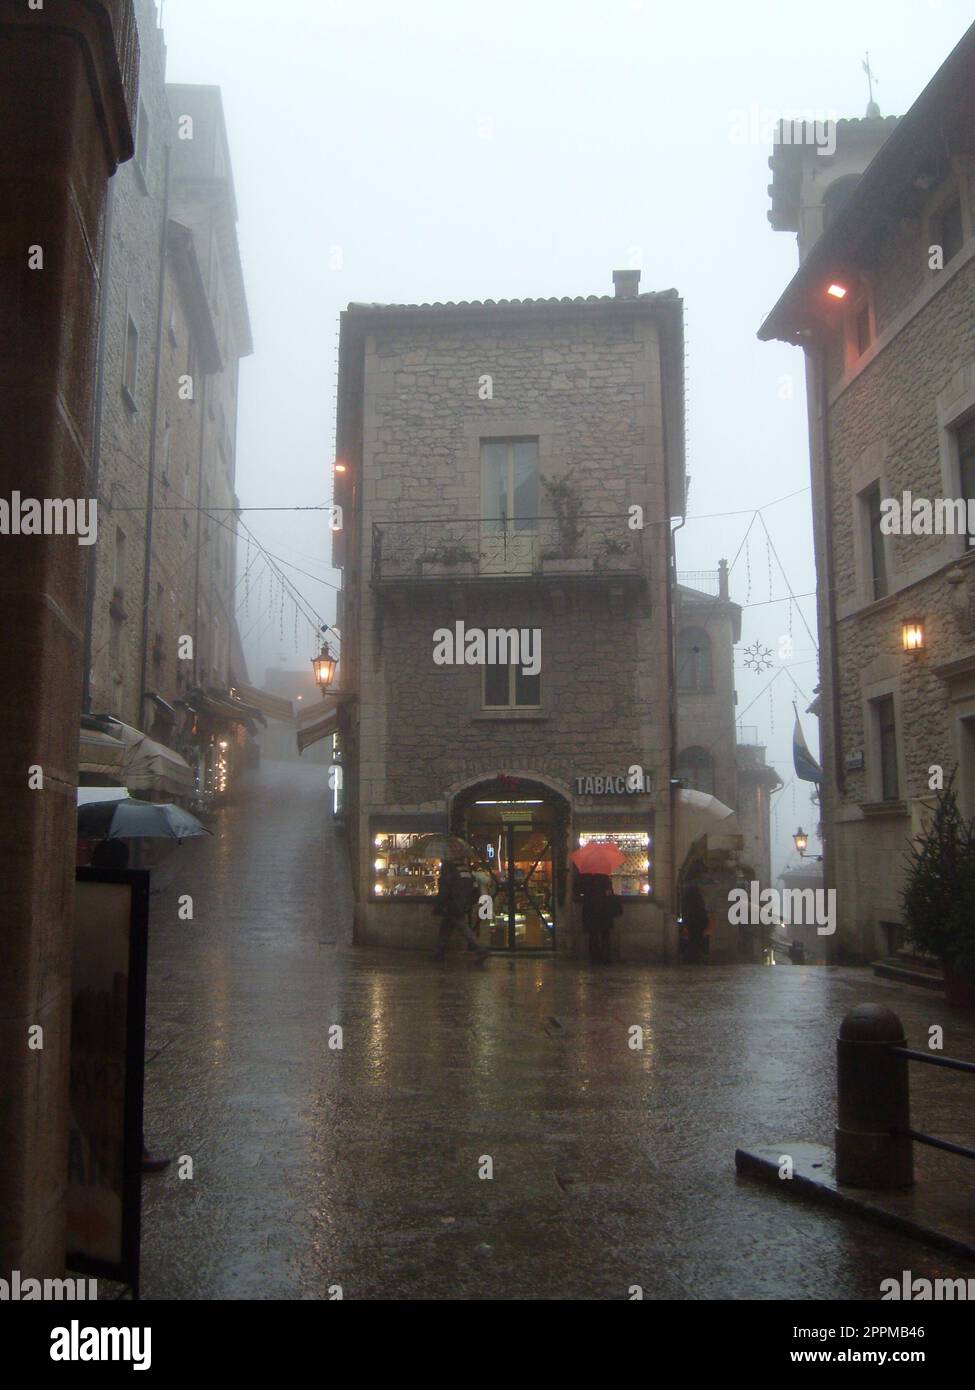 San Marino, January 18, 2020. Fog in San Marino. Low visibility. The historic center of San Marino, the central square. Passers-by under umbrellas rush home. Stock Photo